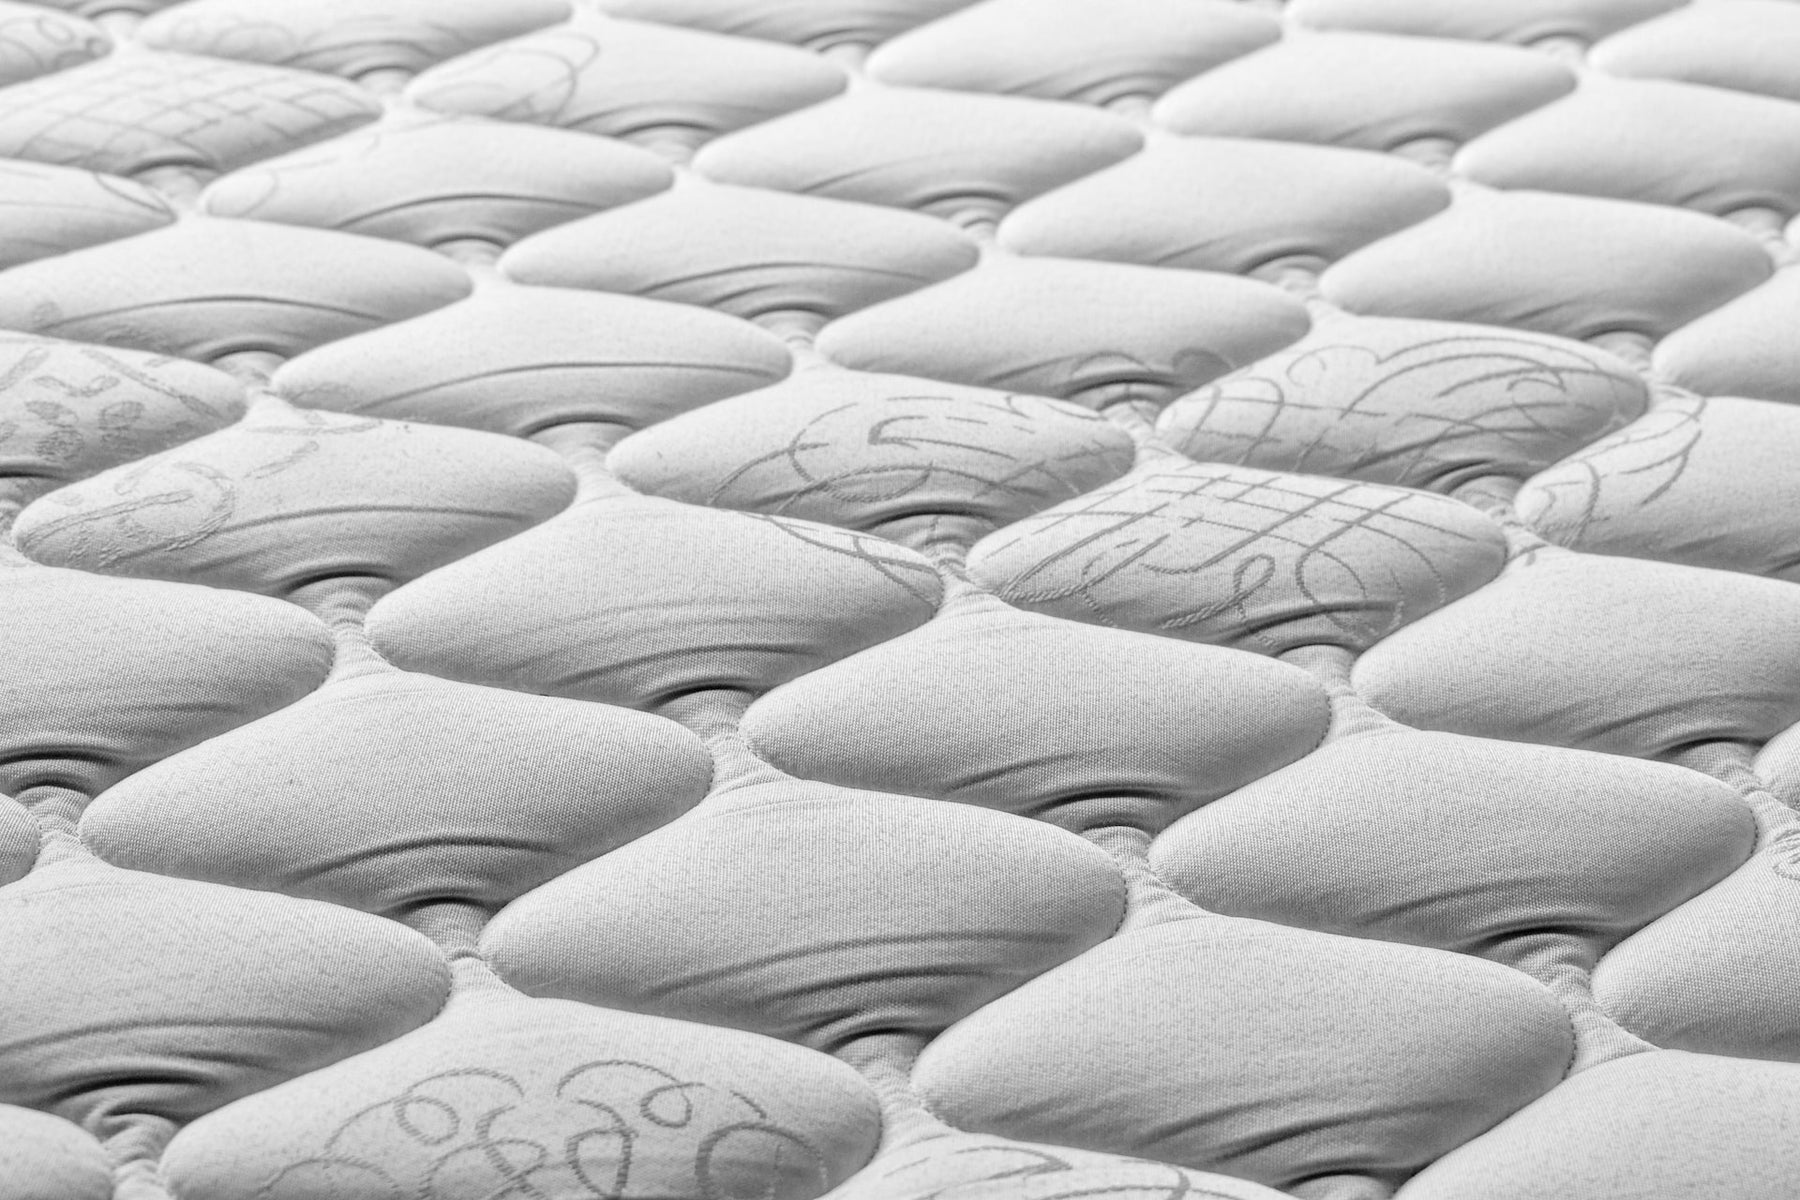 How to clean your mattress to get comfortable sleep?